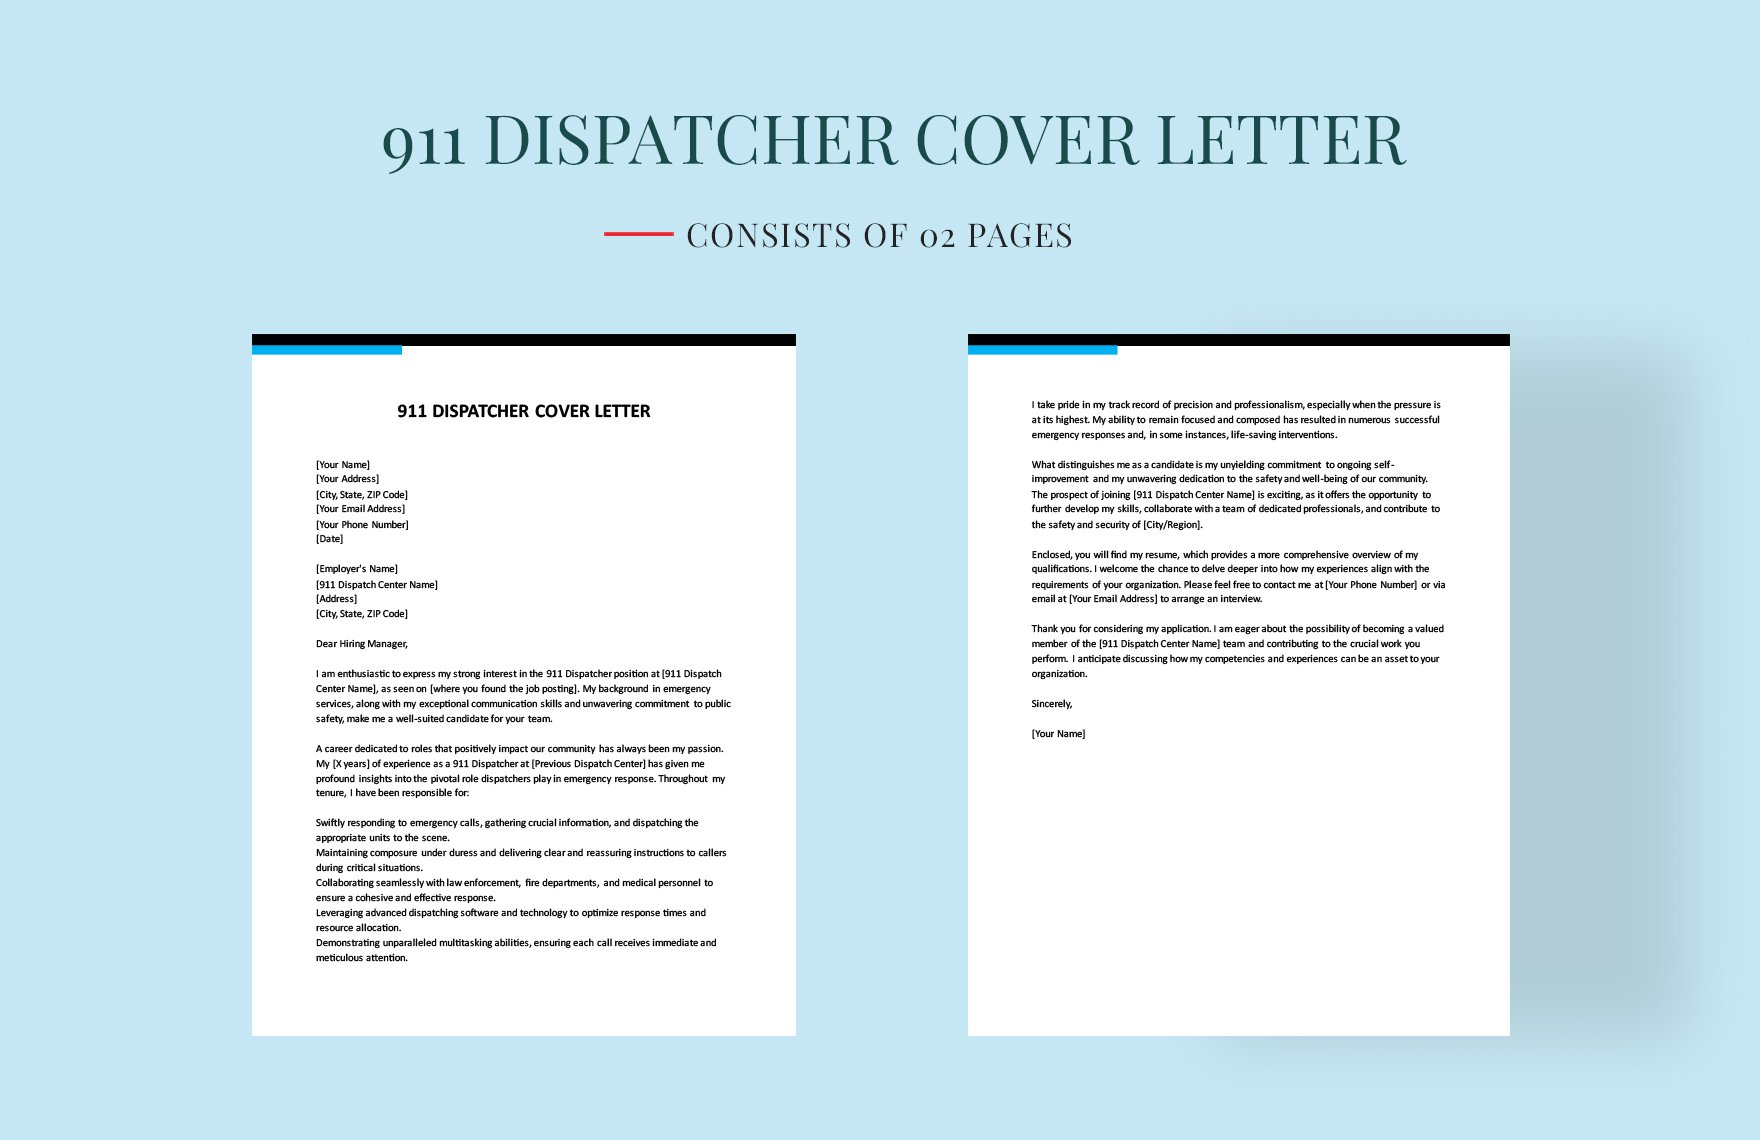 911 Dispatcher Cover Letter in Word, Google Docs, PDF